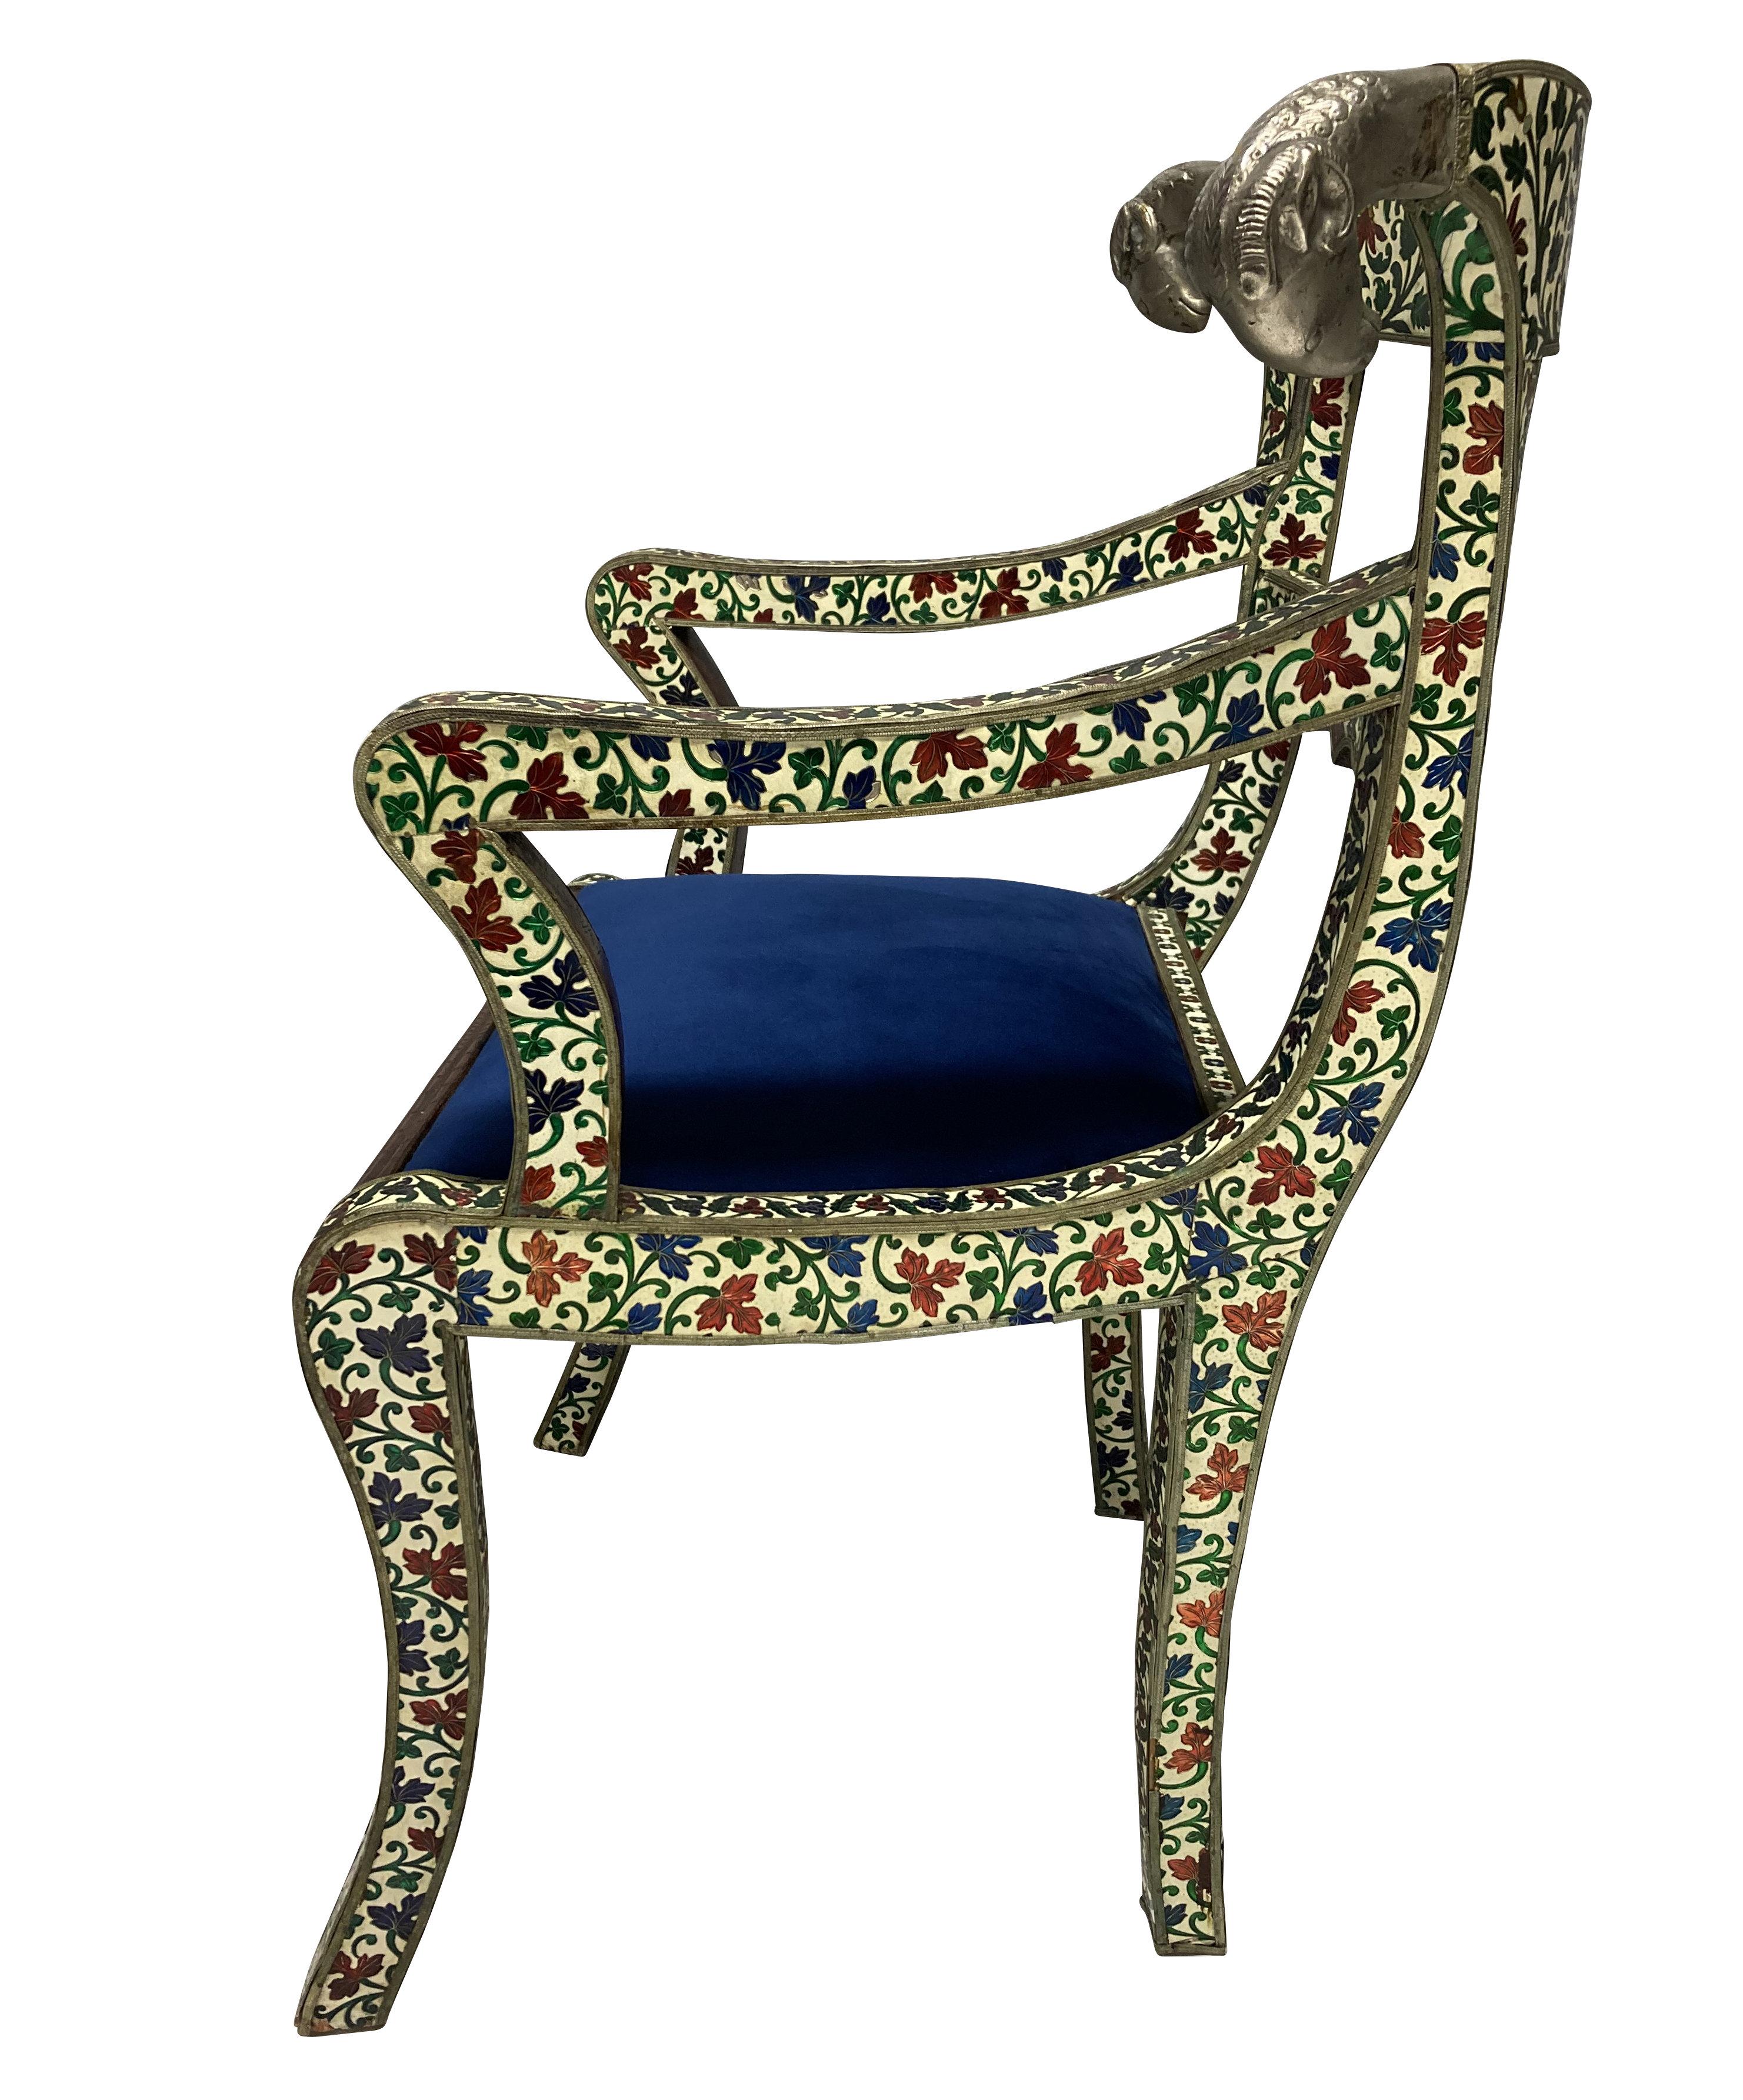 19th Century Pair of Rare Indian Cloisonne & Silver Armchairs For Sale